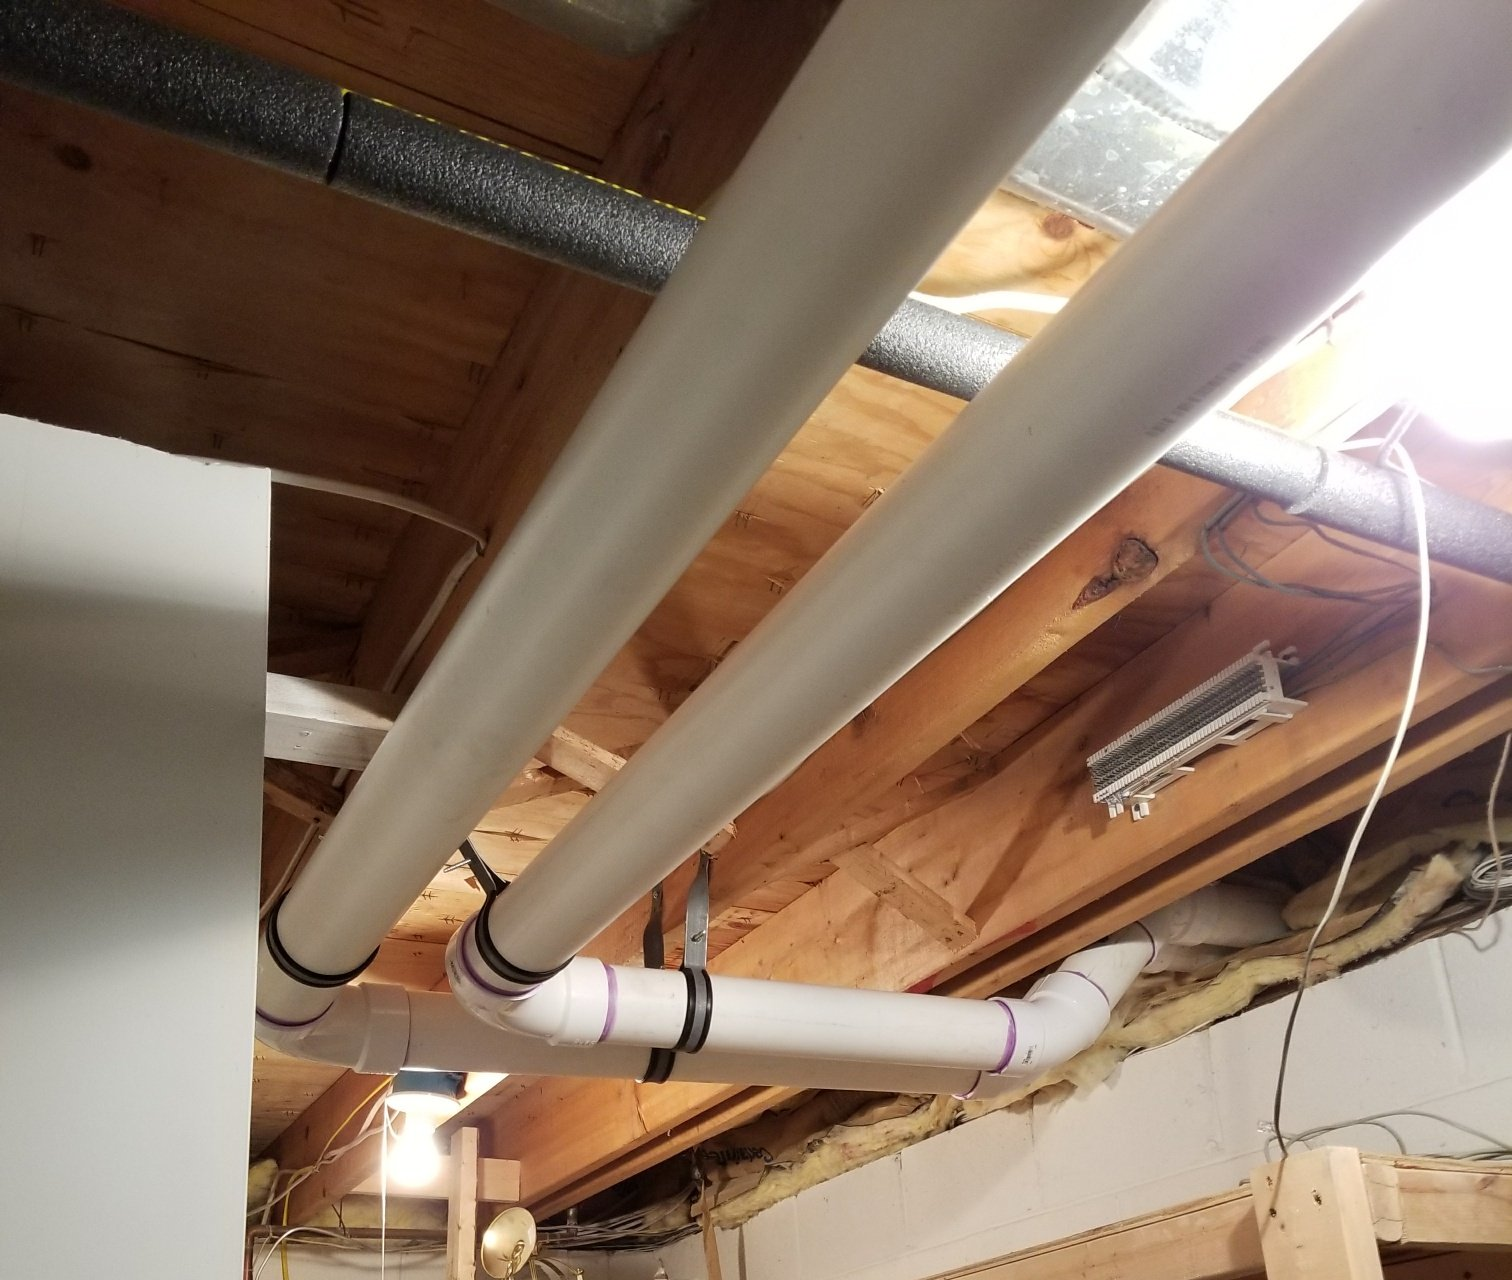 Example HVAC Service Repair with protruding PVC pipes